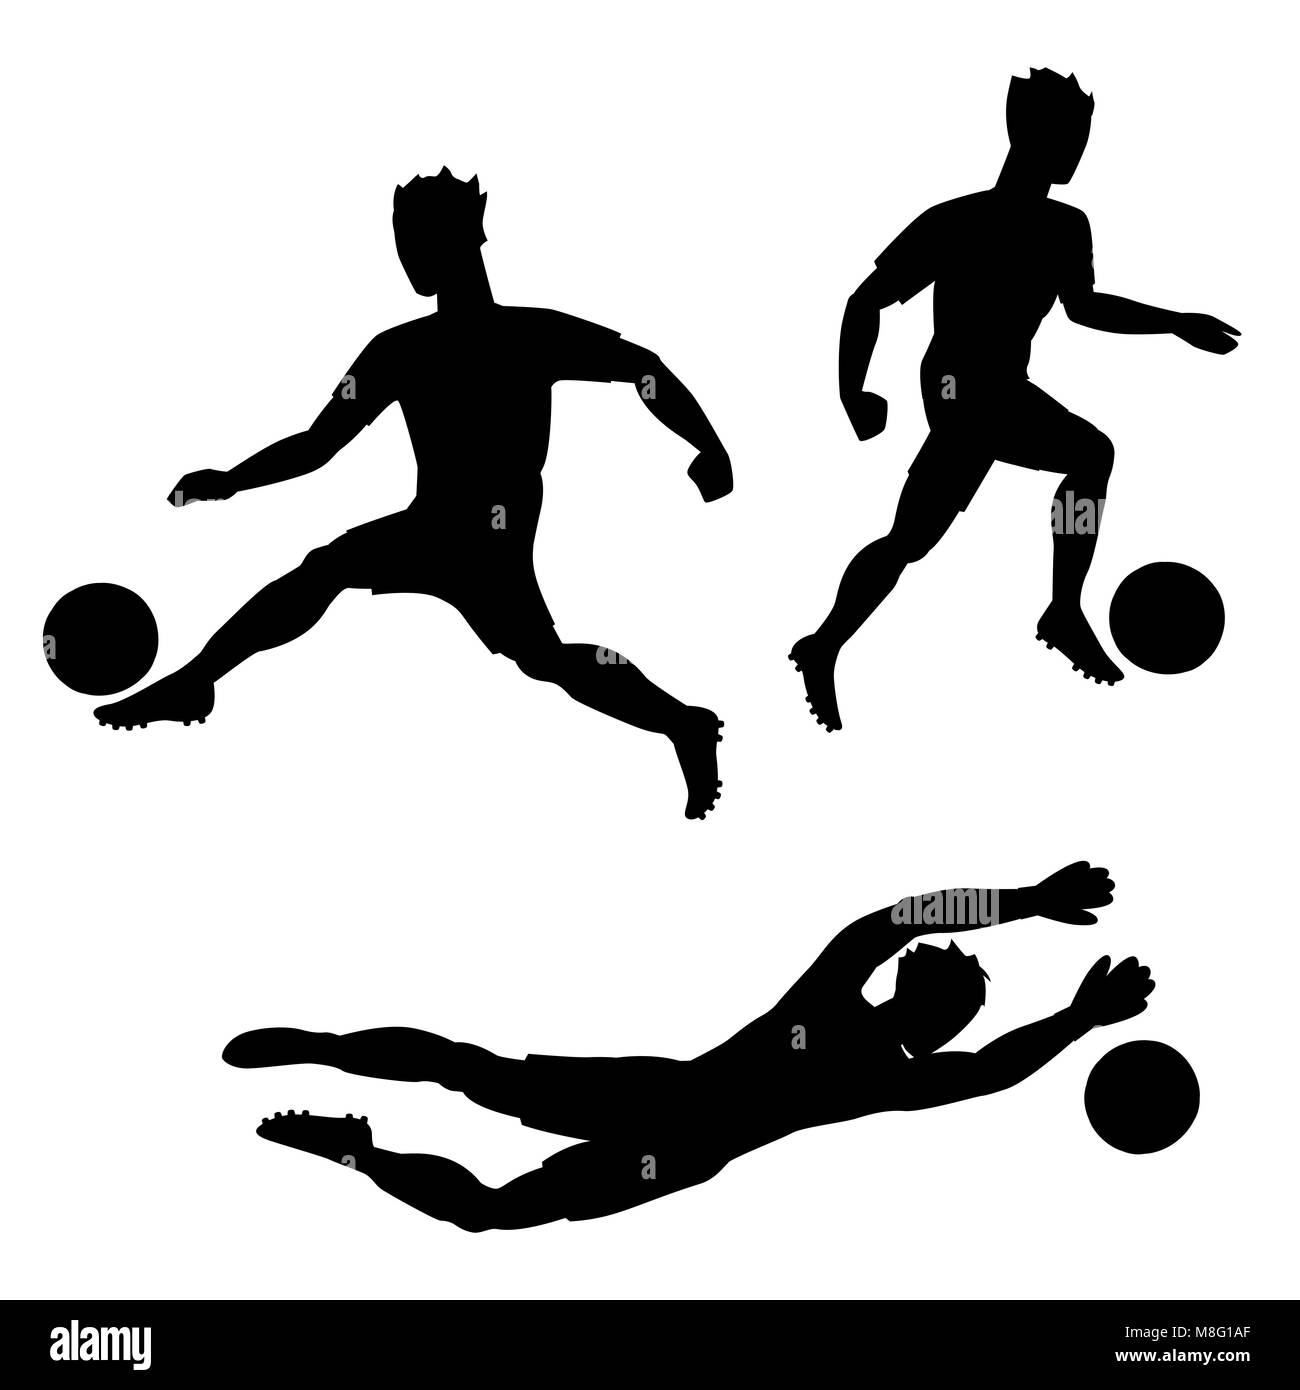 Set of soccer players with balls. Silhouettes of men on white background Stock Vector